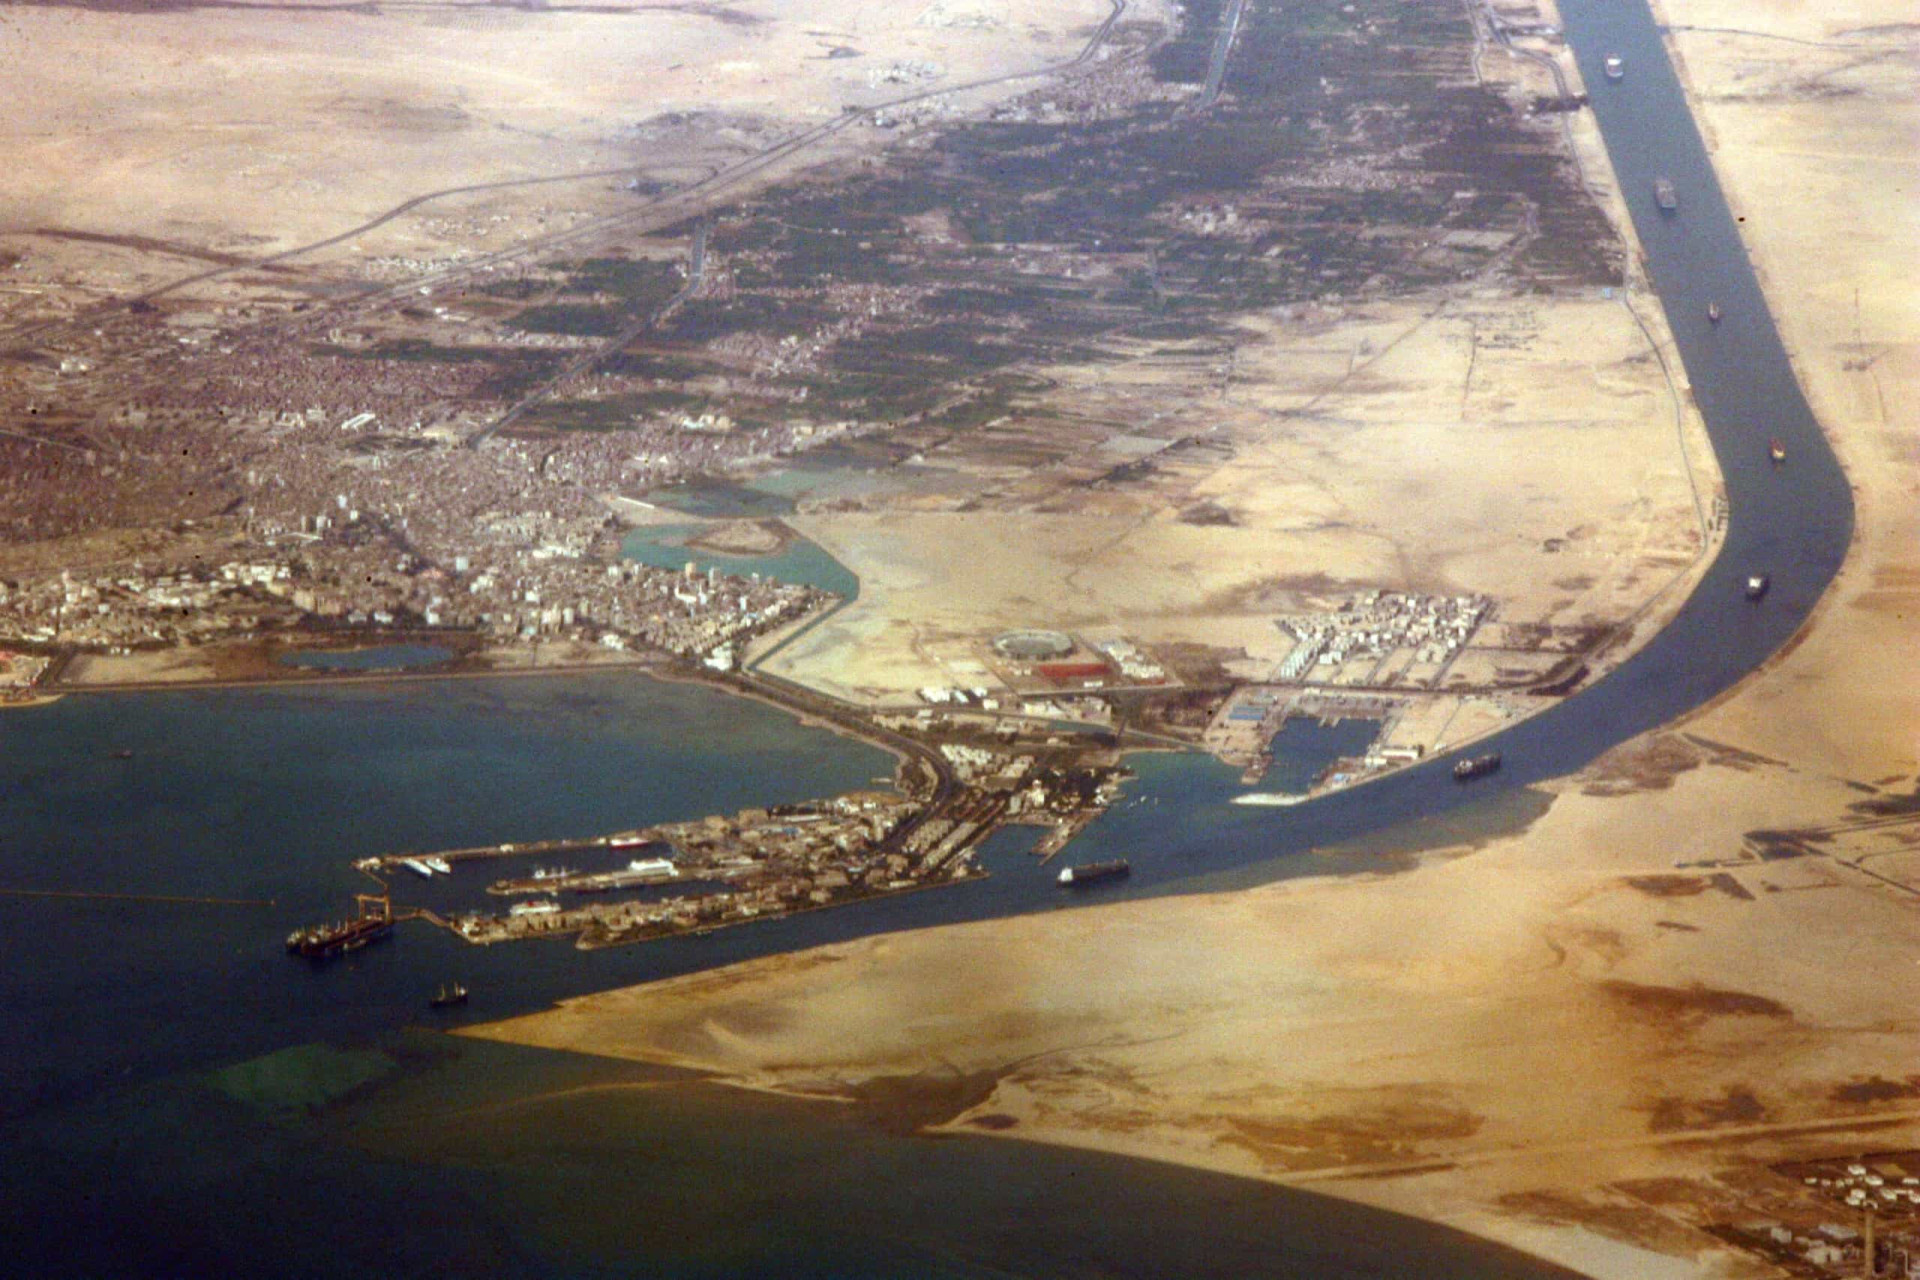 <p>The canal, however, is still hampered by its narrow width and shallow depth, which are insufficient to accommodate two-way traffic from modern tanker ships. The Suez Canal Area Development Project announced in 2014 an ambitious plan to deepen the canal and create a new 35.5-km (22 mi) lane branching off the main channel. This new lane was opened in 2016, the first phase of the US$8.5 billion project. However, the canal still experiences major issues from time to time. </p><p>You may also like:<a href="https://www.starsinsider.com/n/368074?utm_source=msn.com&utm_medium=display&utm_campaign=referral_description&utm_content=455090v9en-en_selected"> The 15 best and worst Clint Eastwood films of all time</a></p>